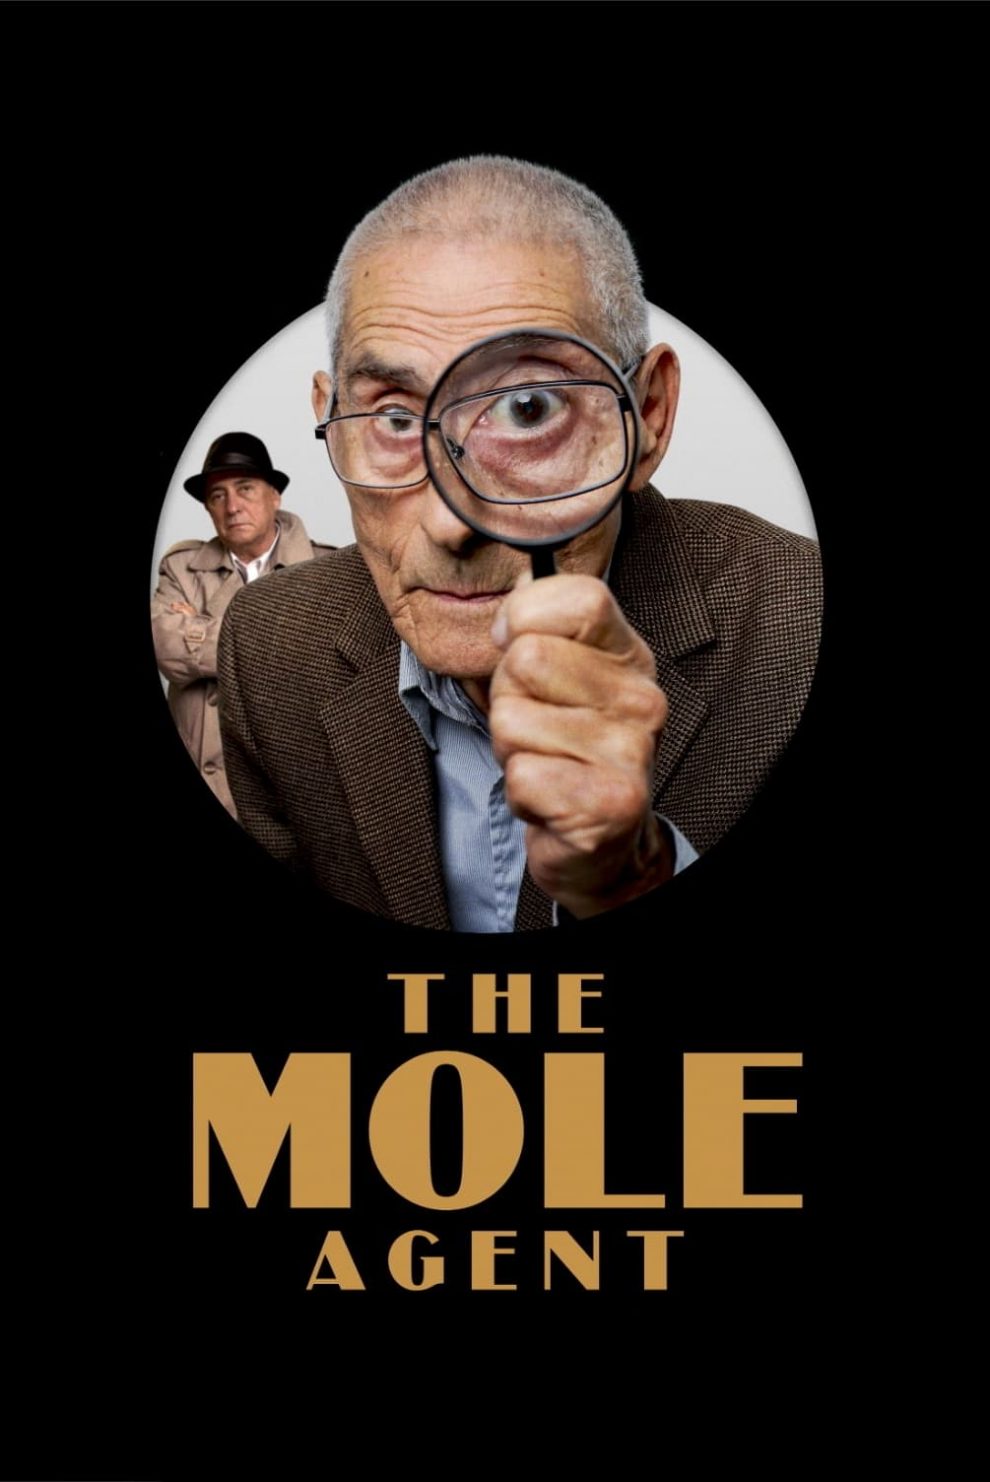 Poster for the movie "The Mole Agent"